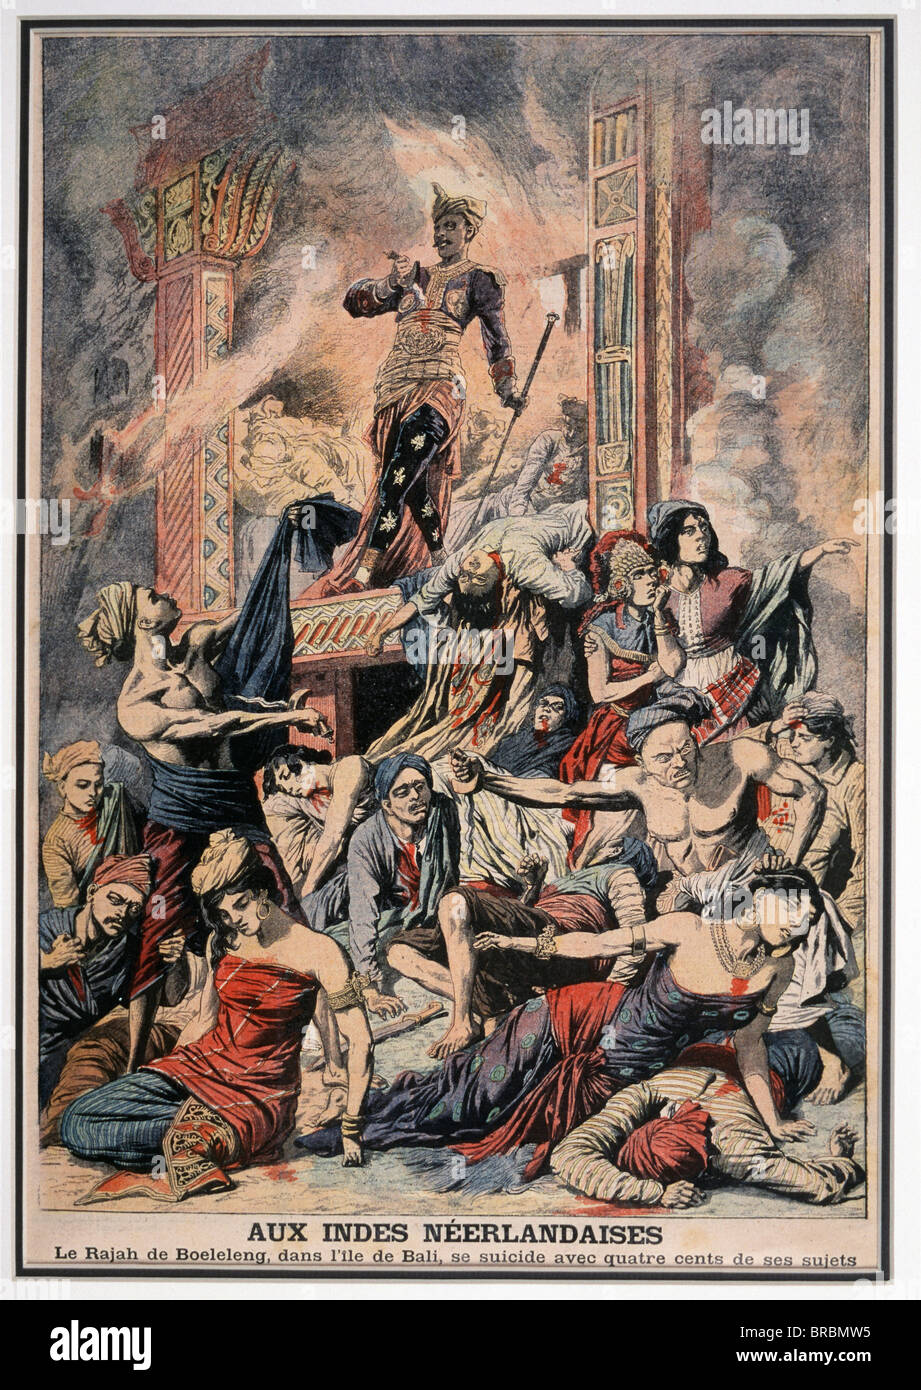 The Puputan or mass suicide in Denpasar (Buleling), when Dutch invaded Bali as depicted by a French magazine, Bali Indonesia Stock Photo